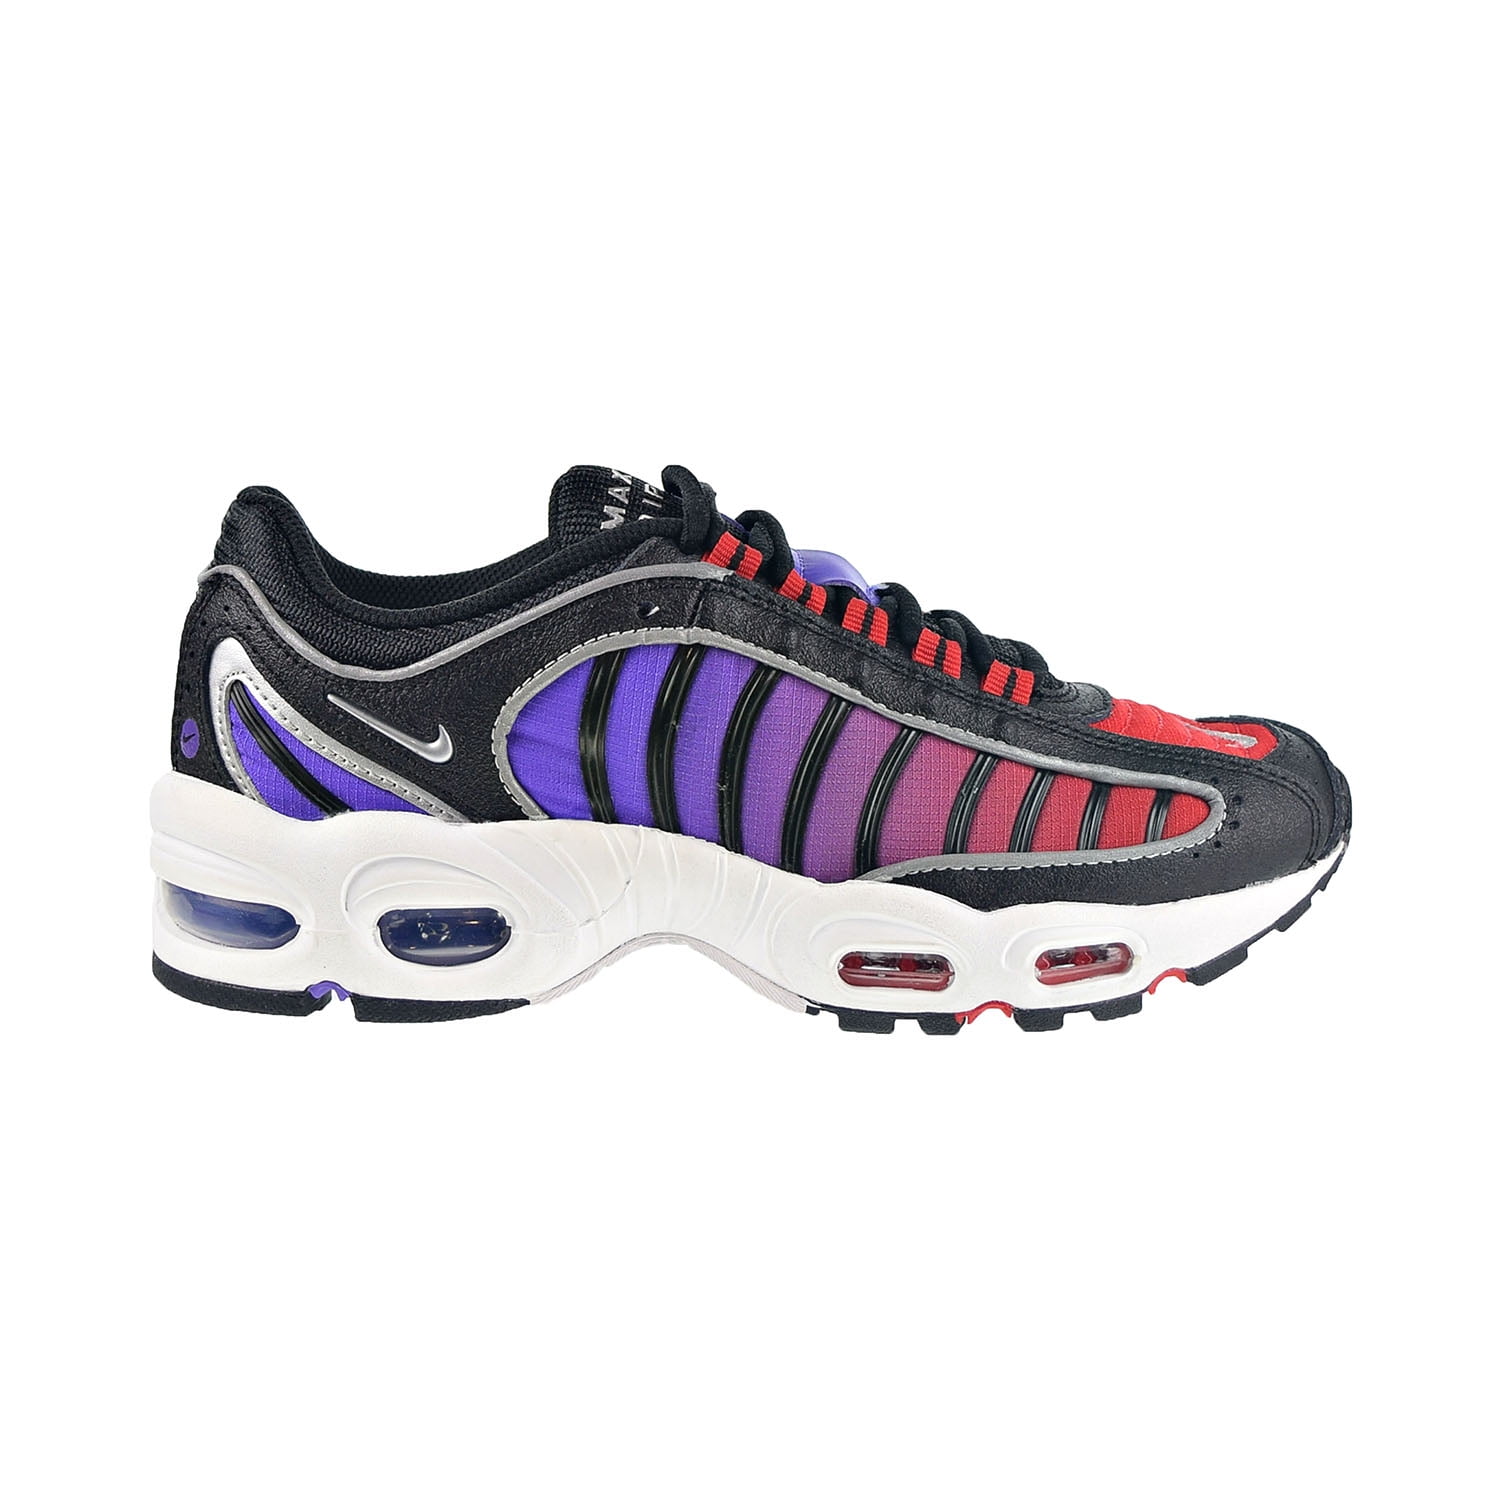 nike air max tailwind iv black and red